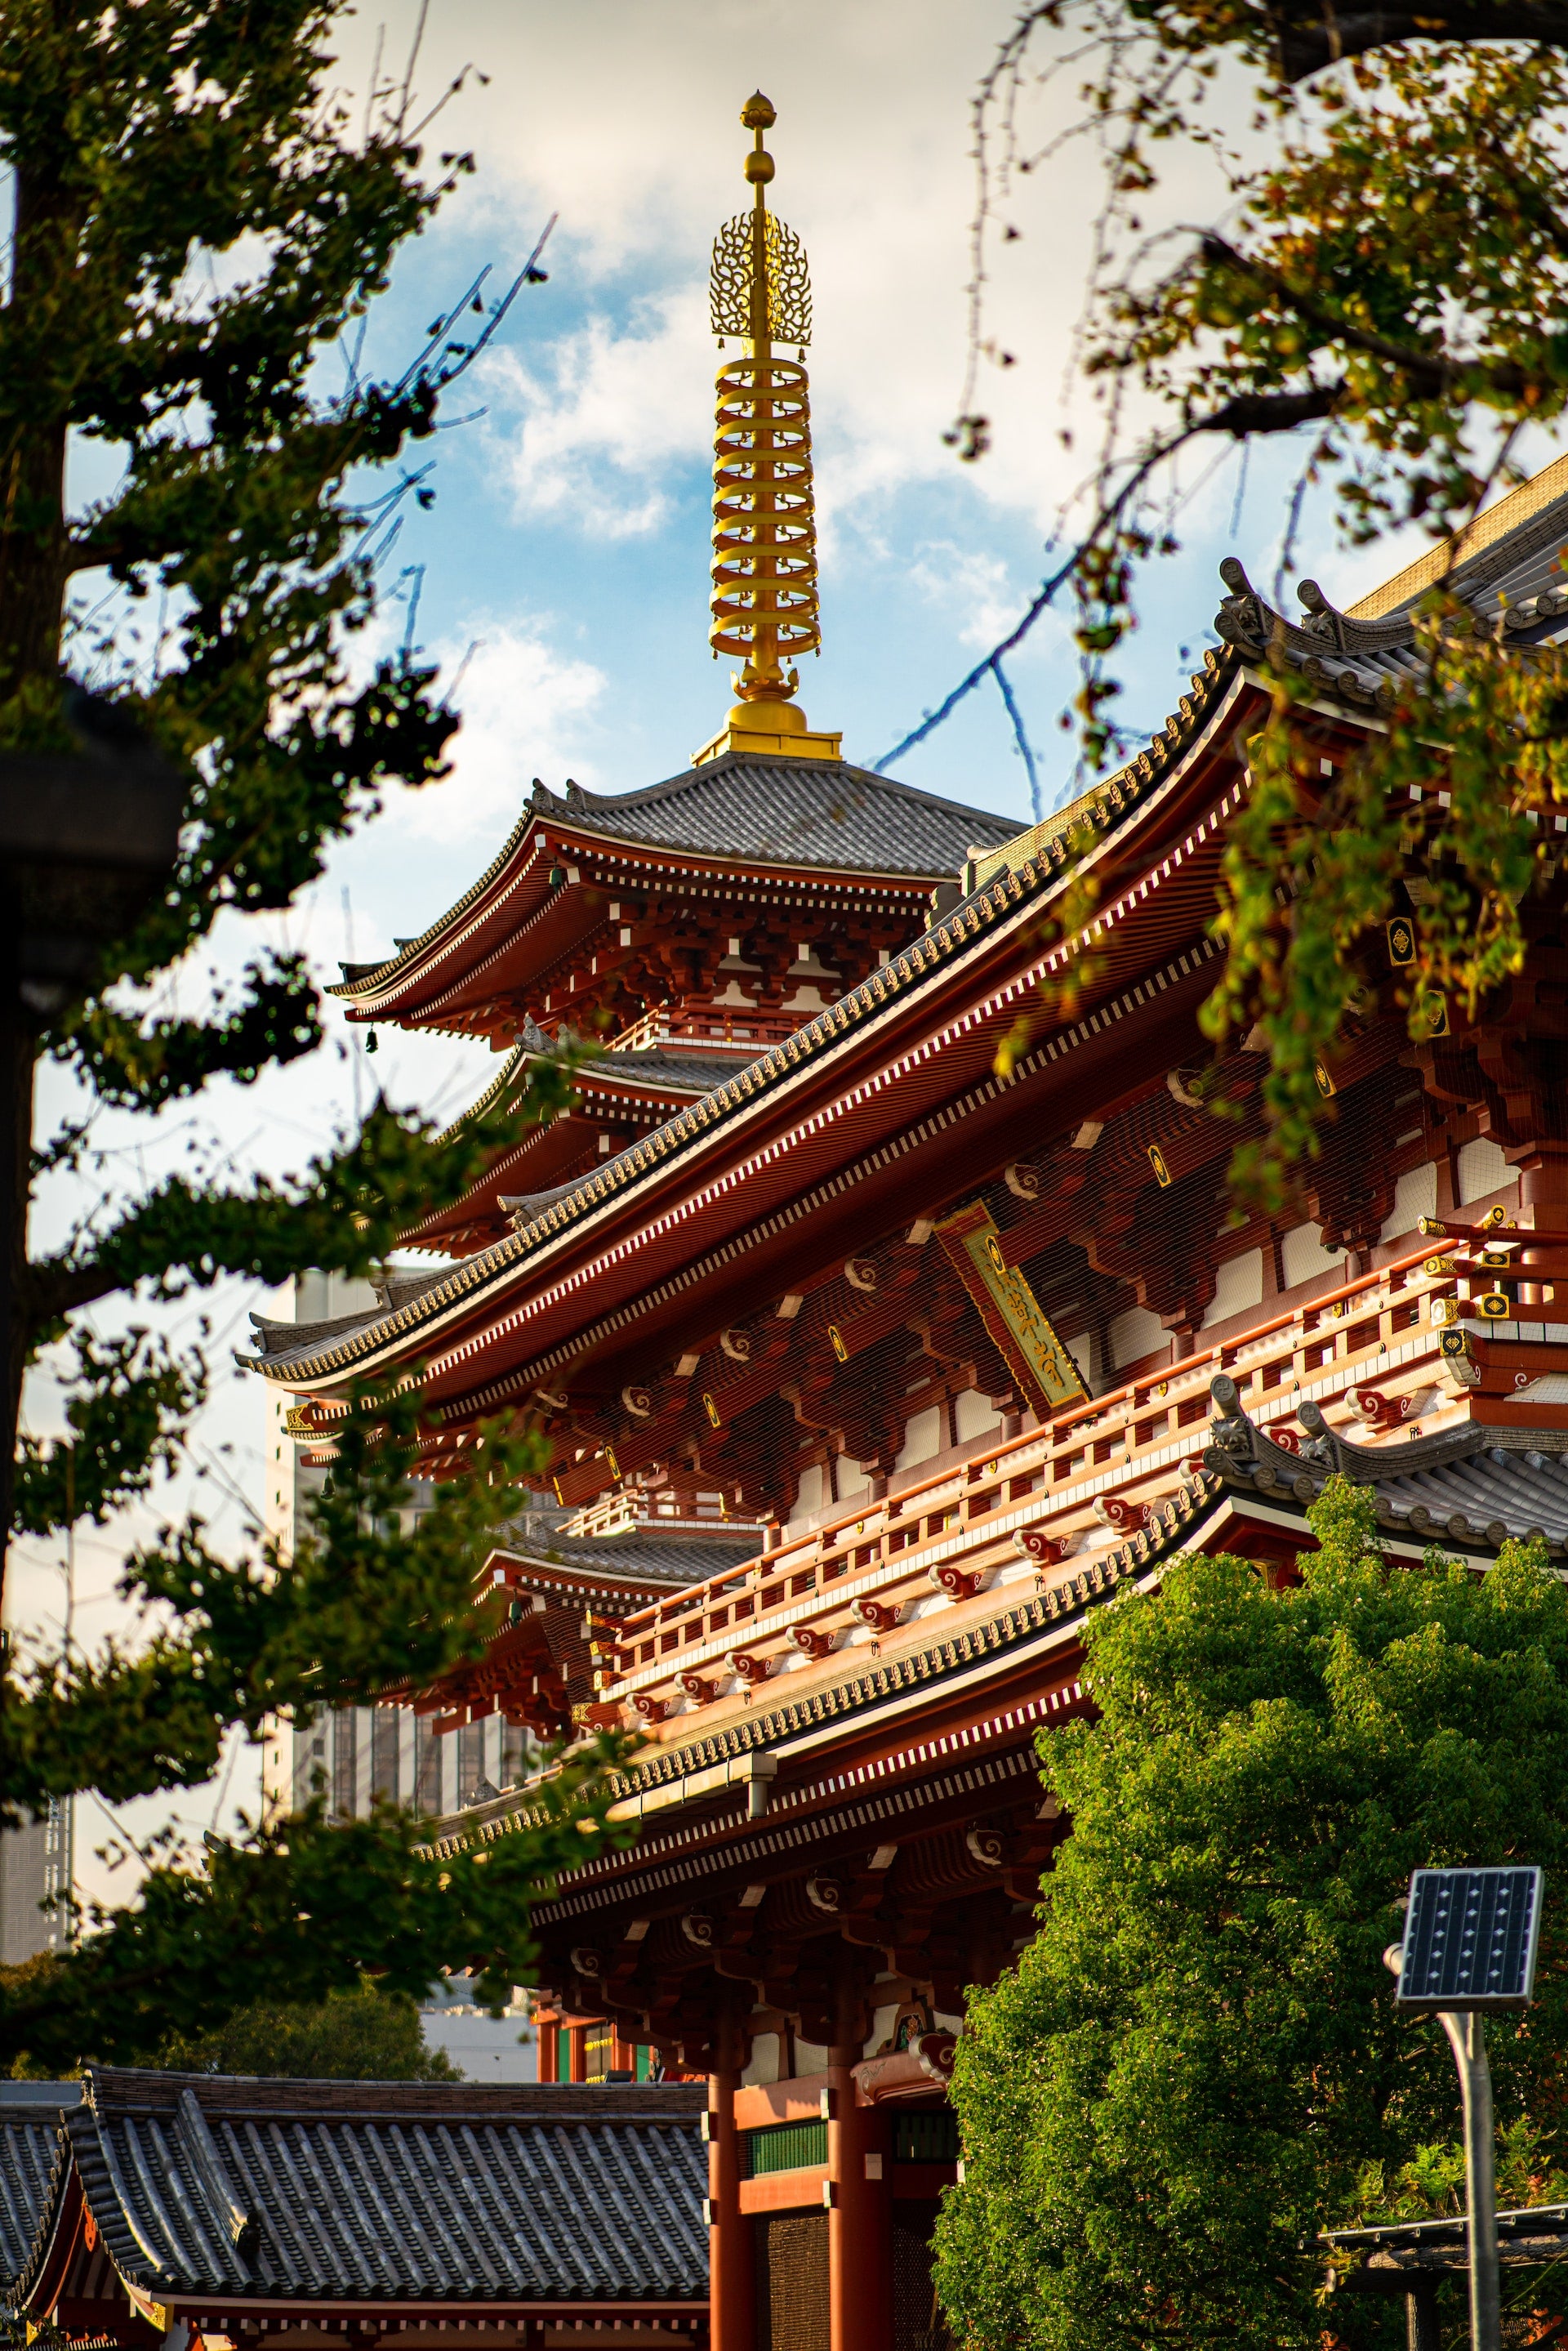 Sherpani Travel: This Ancient Buddhist Temple is a Tokyo Must